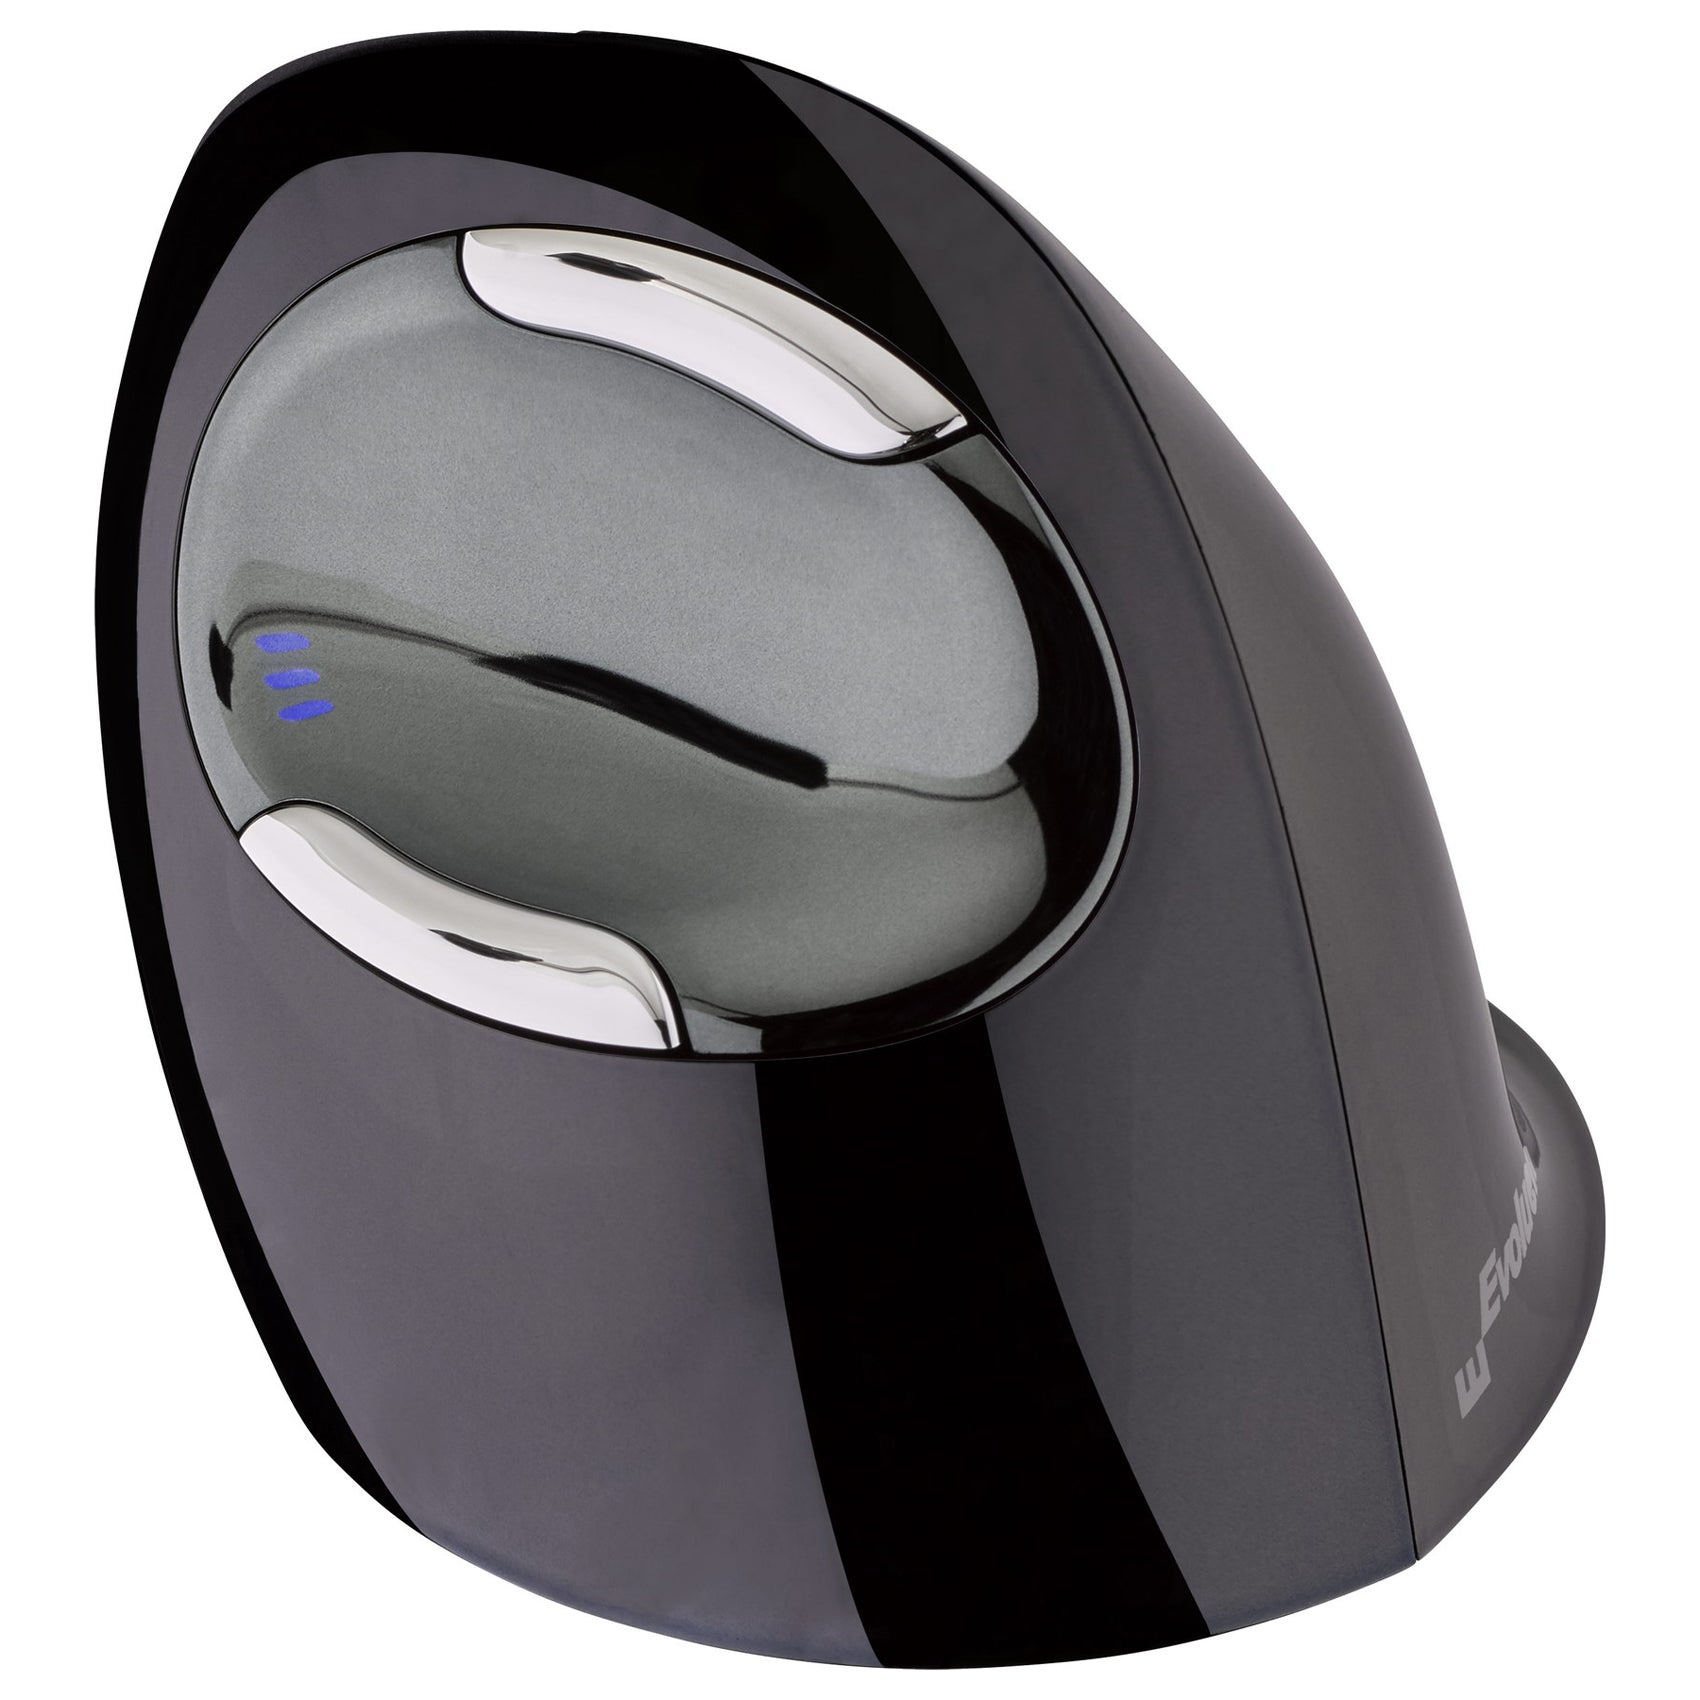 Evoluent D Mouse Wireless Small